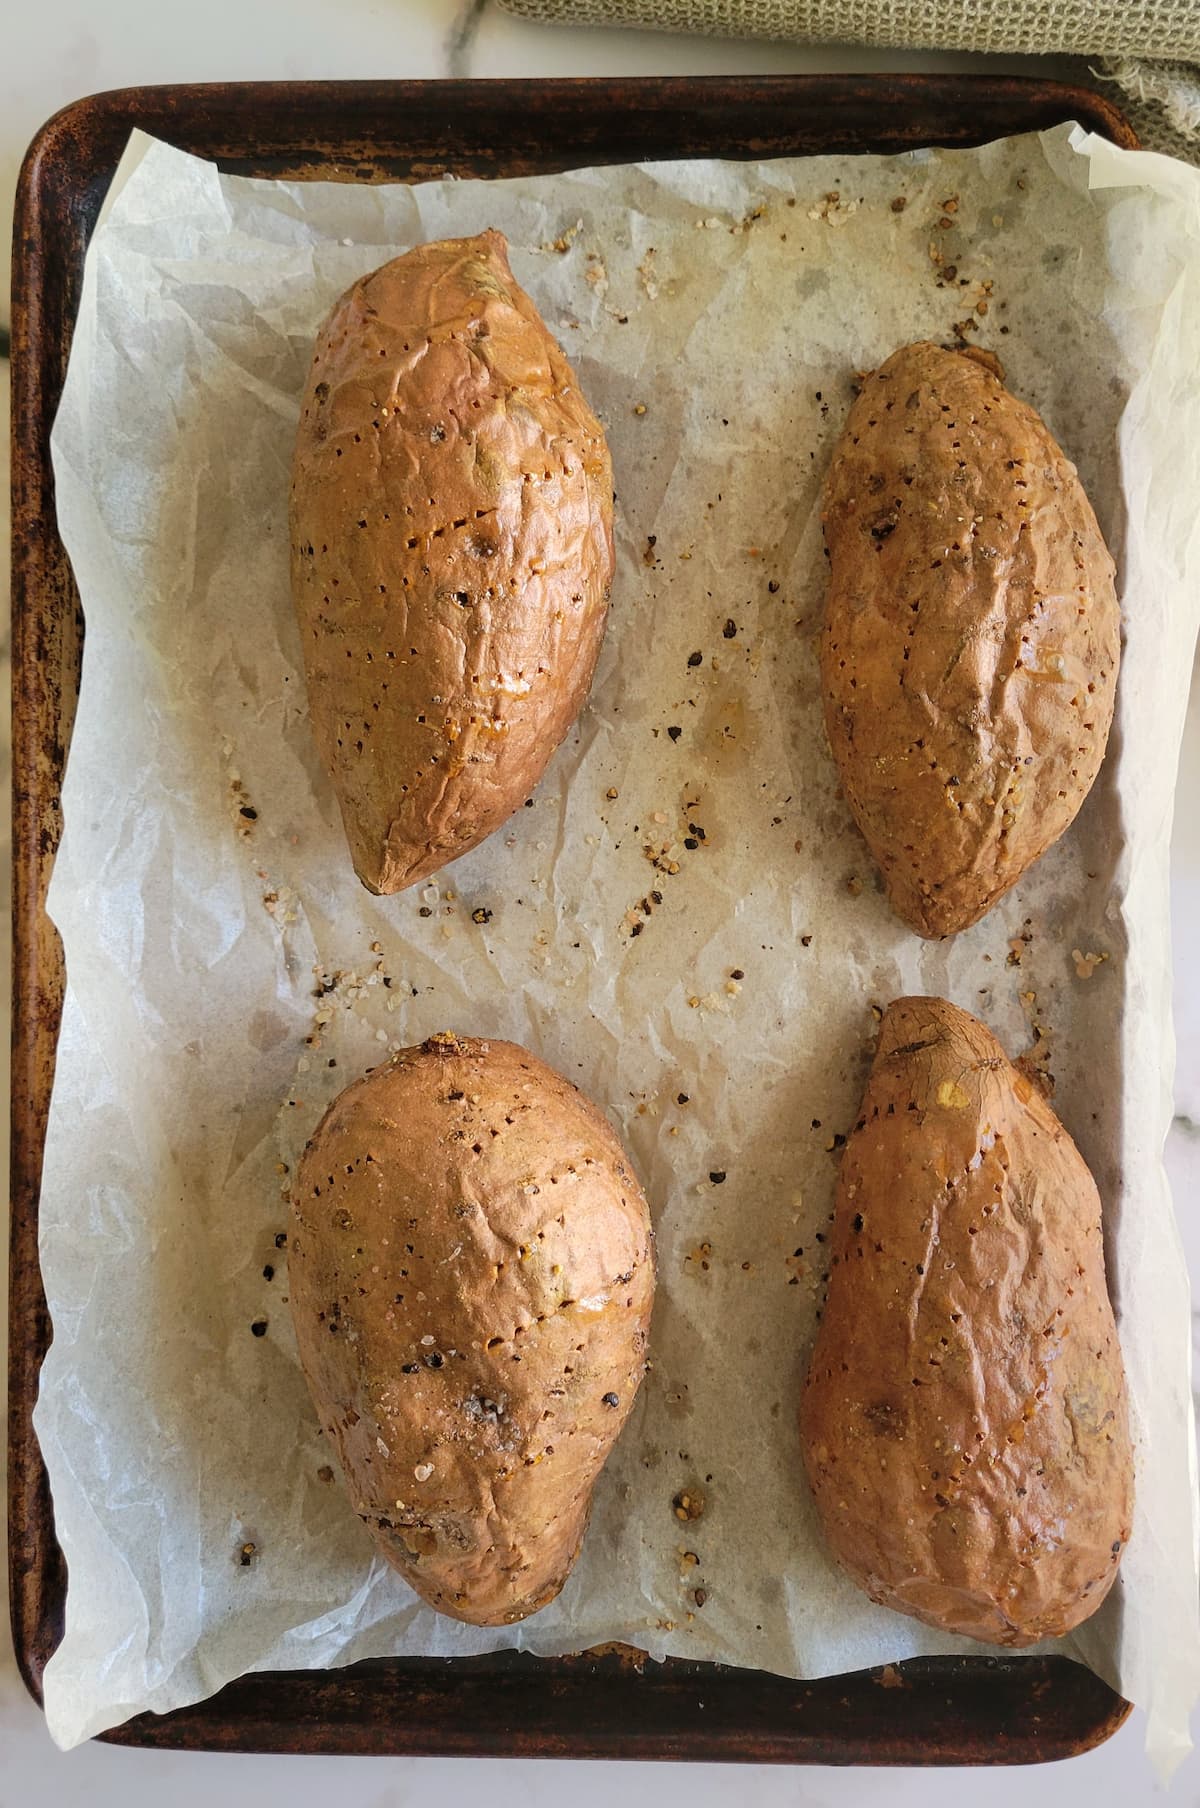 4 sweet potatoes on a parchment lined baking sheet